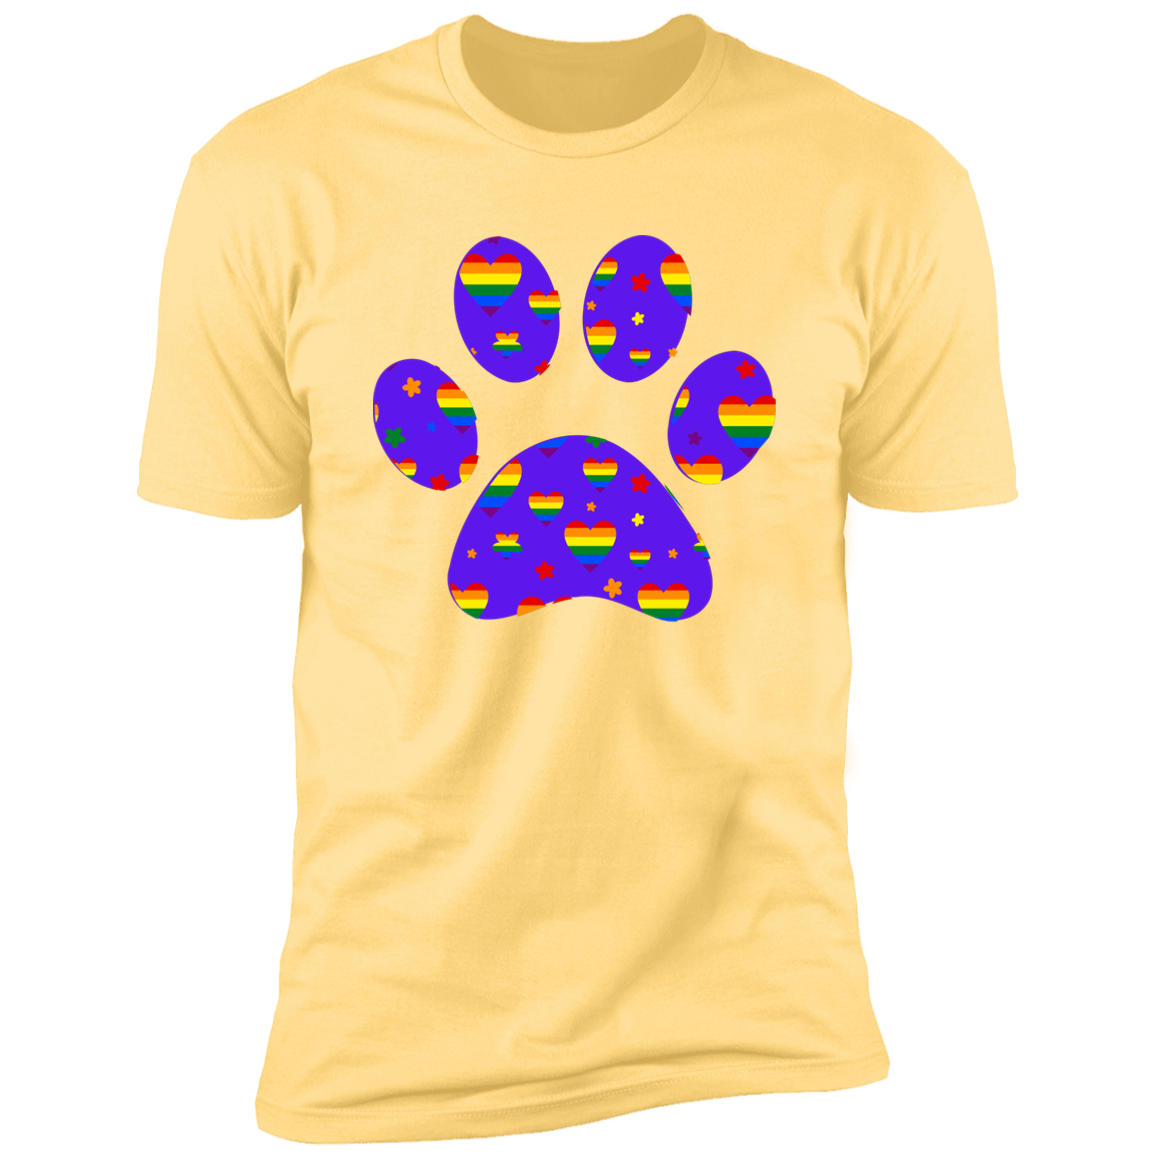 Pride Paw 2023 (Hearts) Pride T-shirt, Paw Pride Dog Shirt for humans, in banana cream